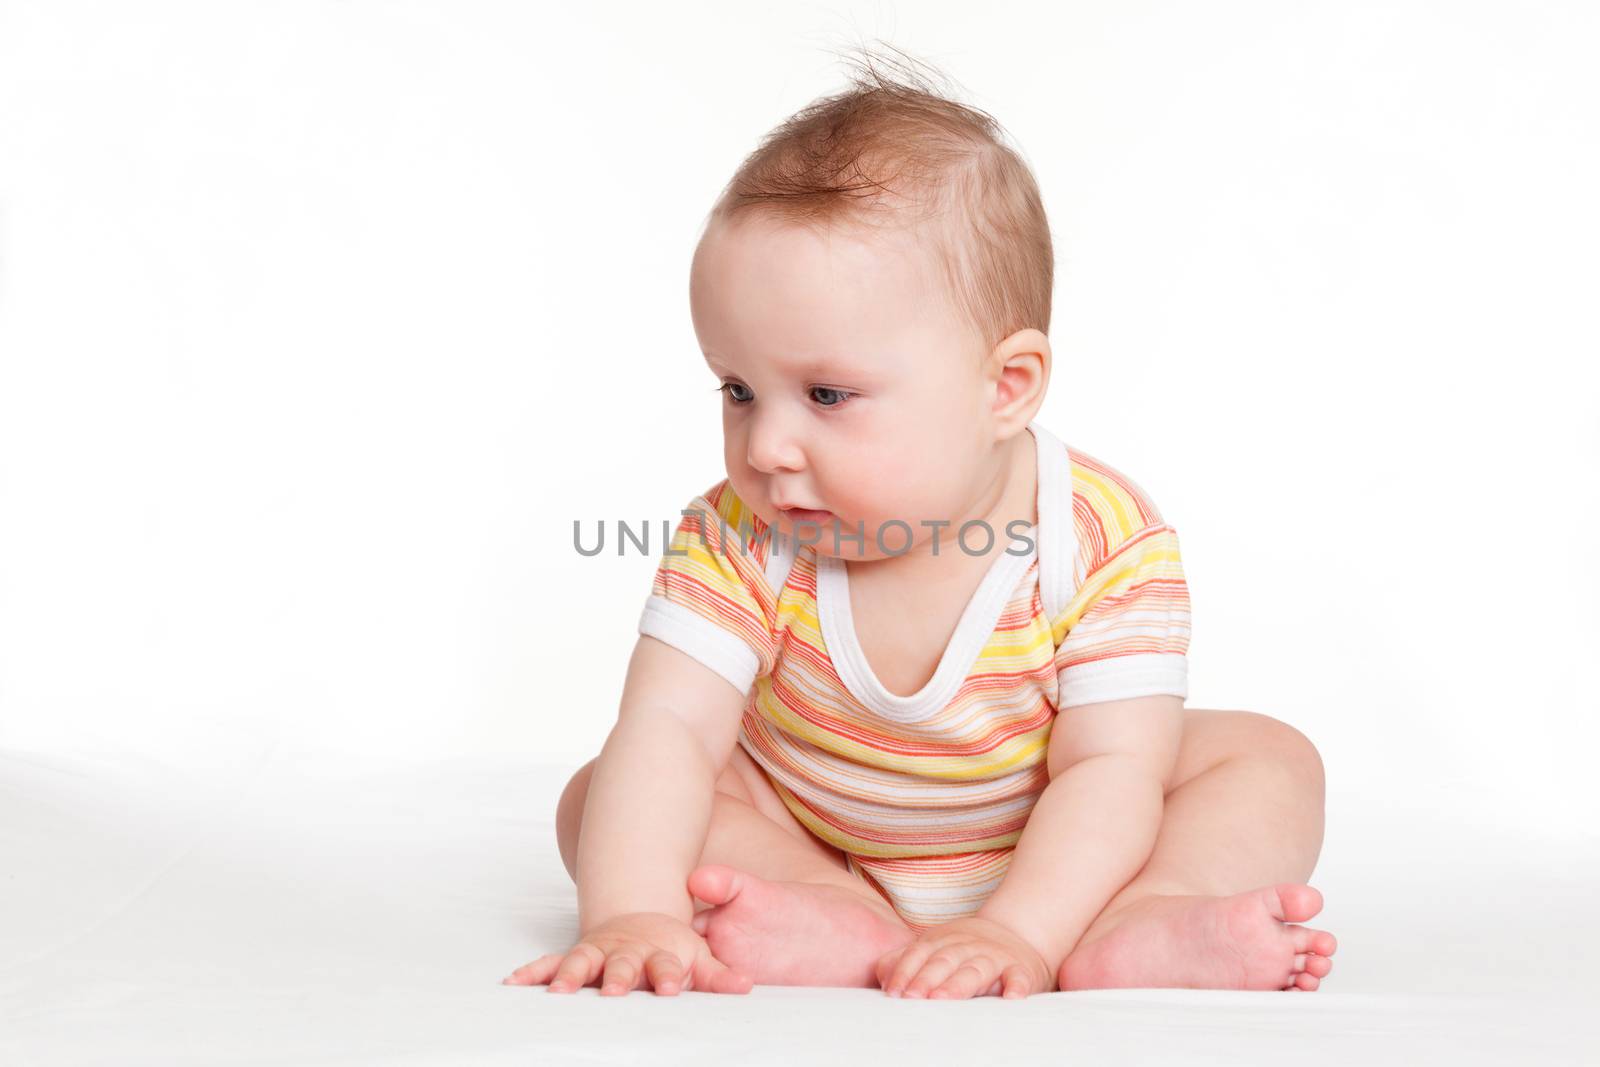 Cute small baby sitting and looking isolated on white background. Happy tiny adorable newborn baby.